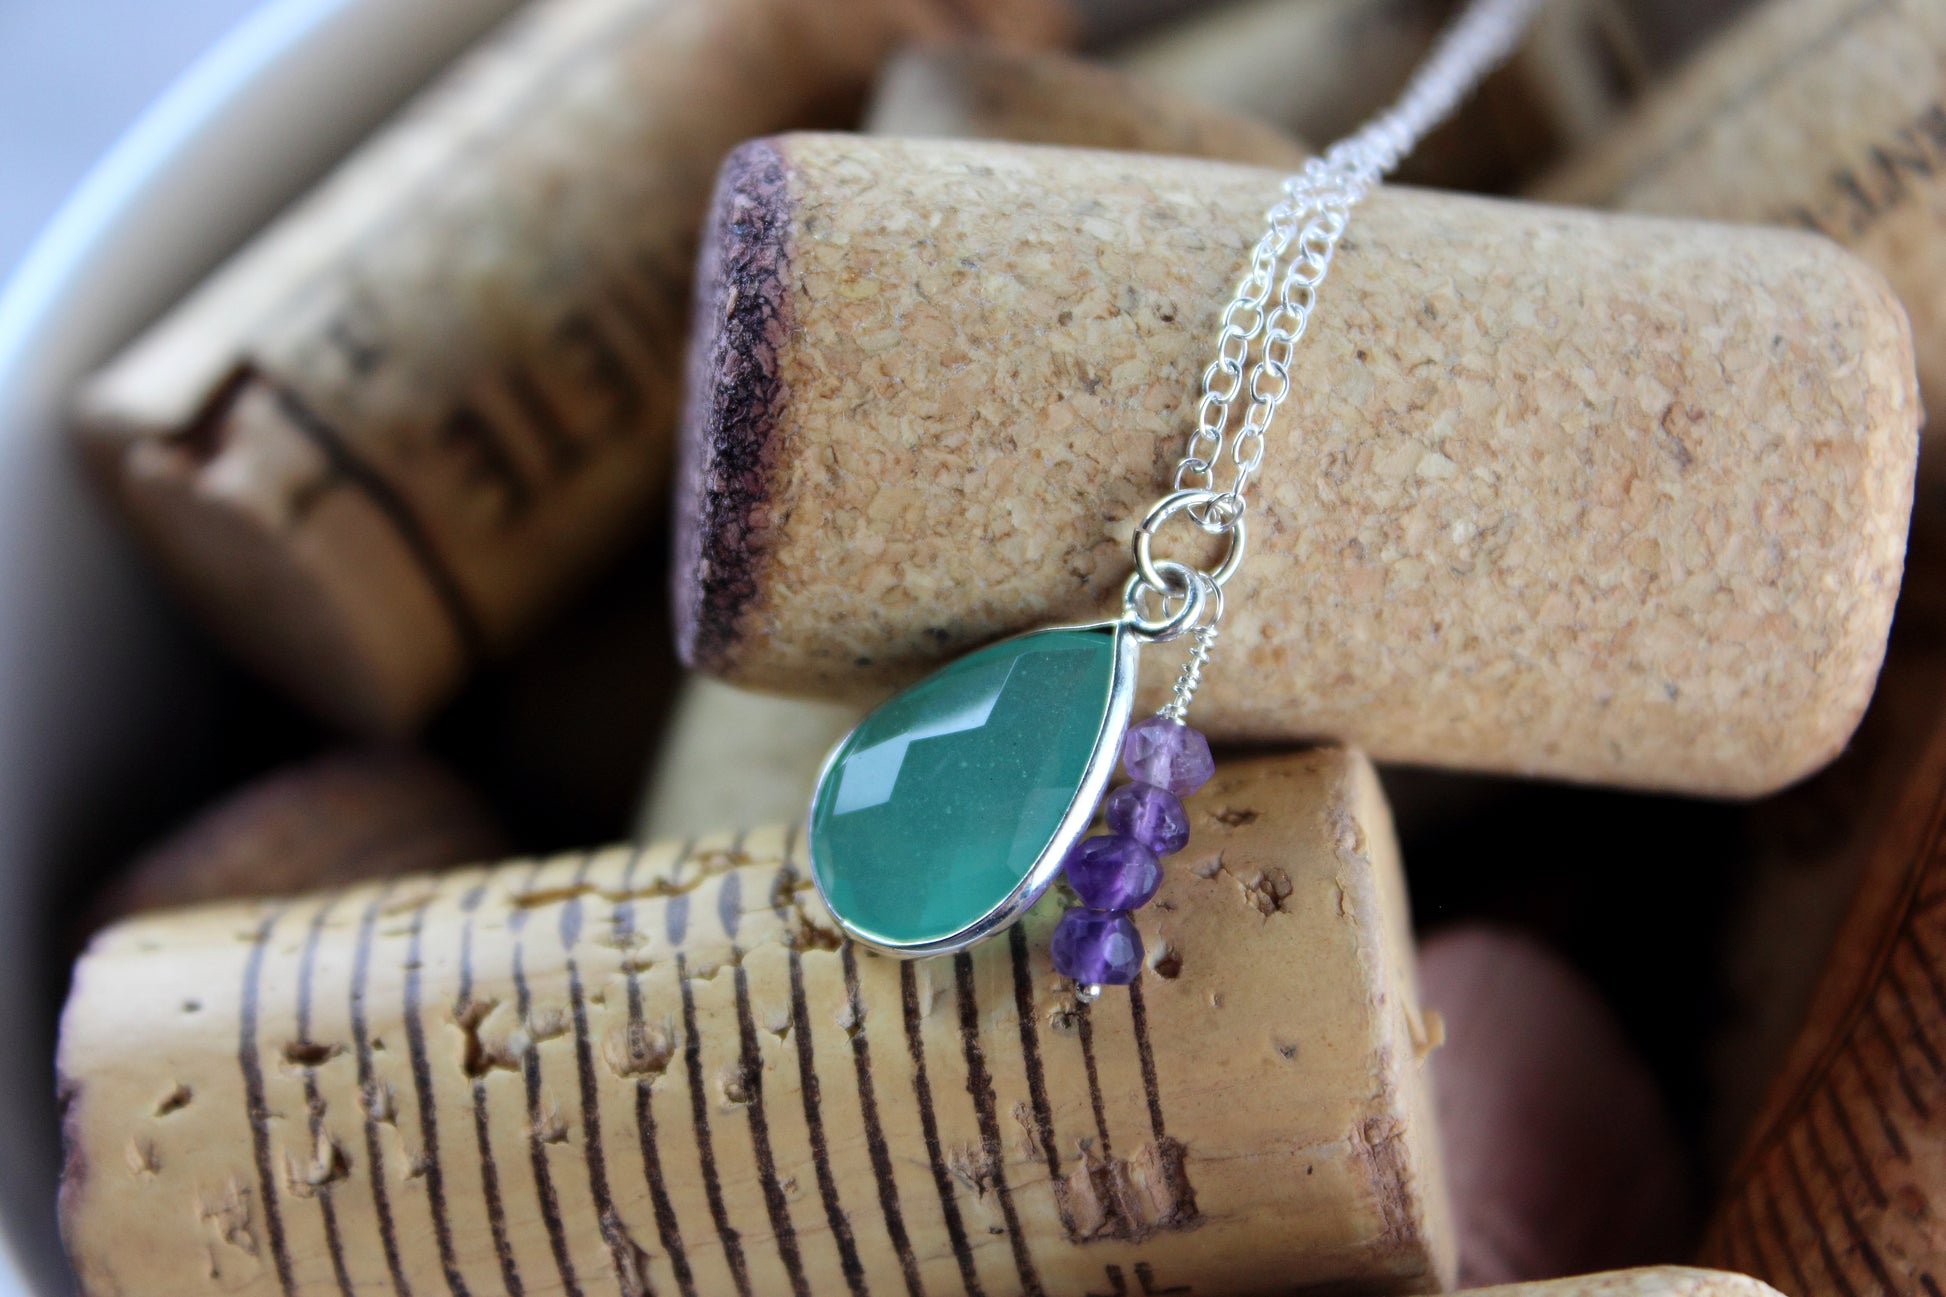 Aqua Chalcedony and Amethyst necklace